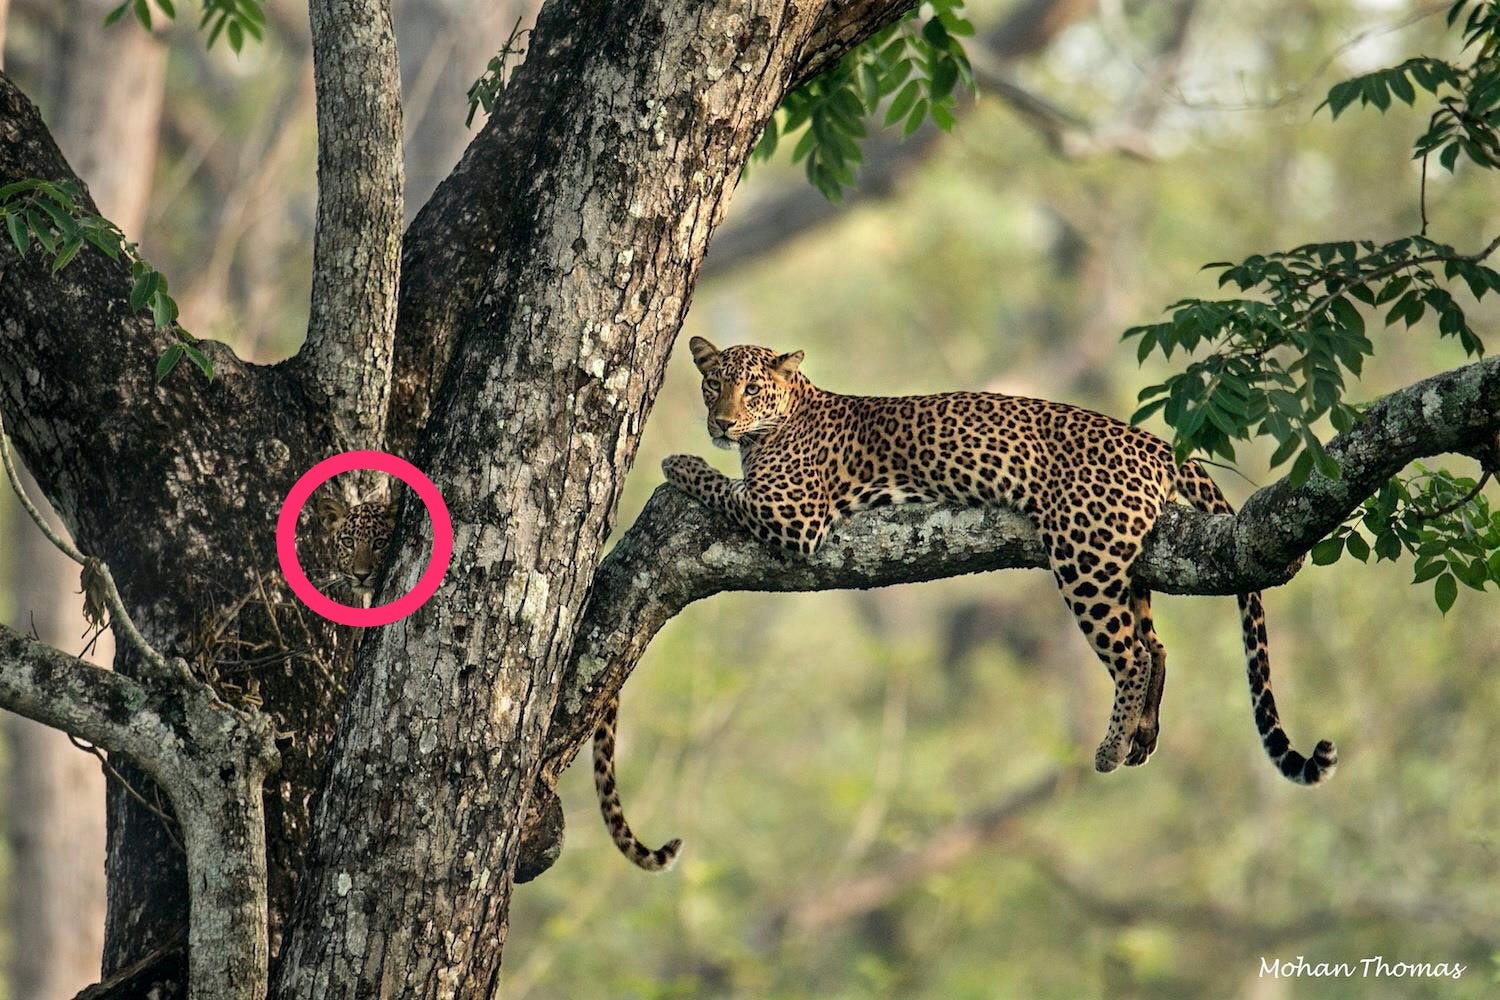 A hidden leopard cub's location revealed with a red circle around its face